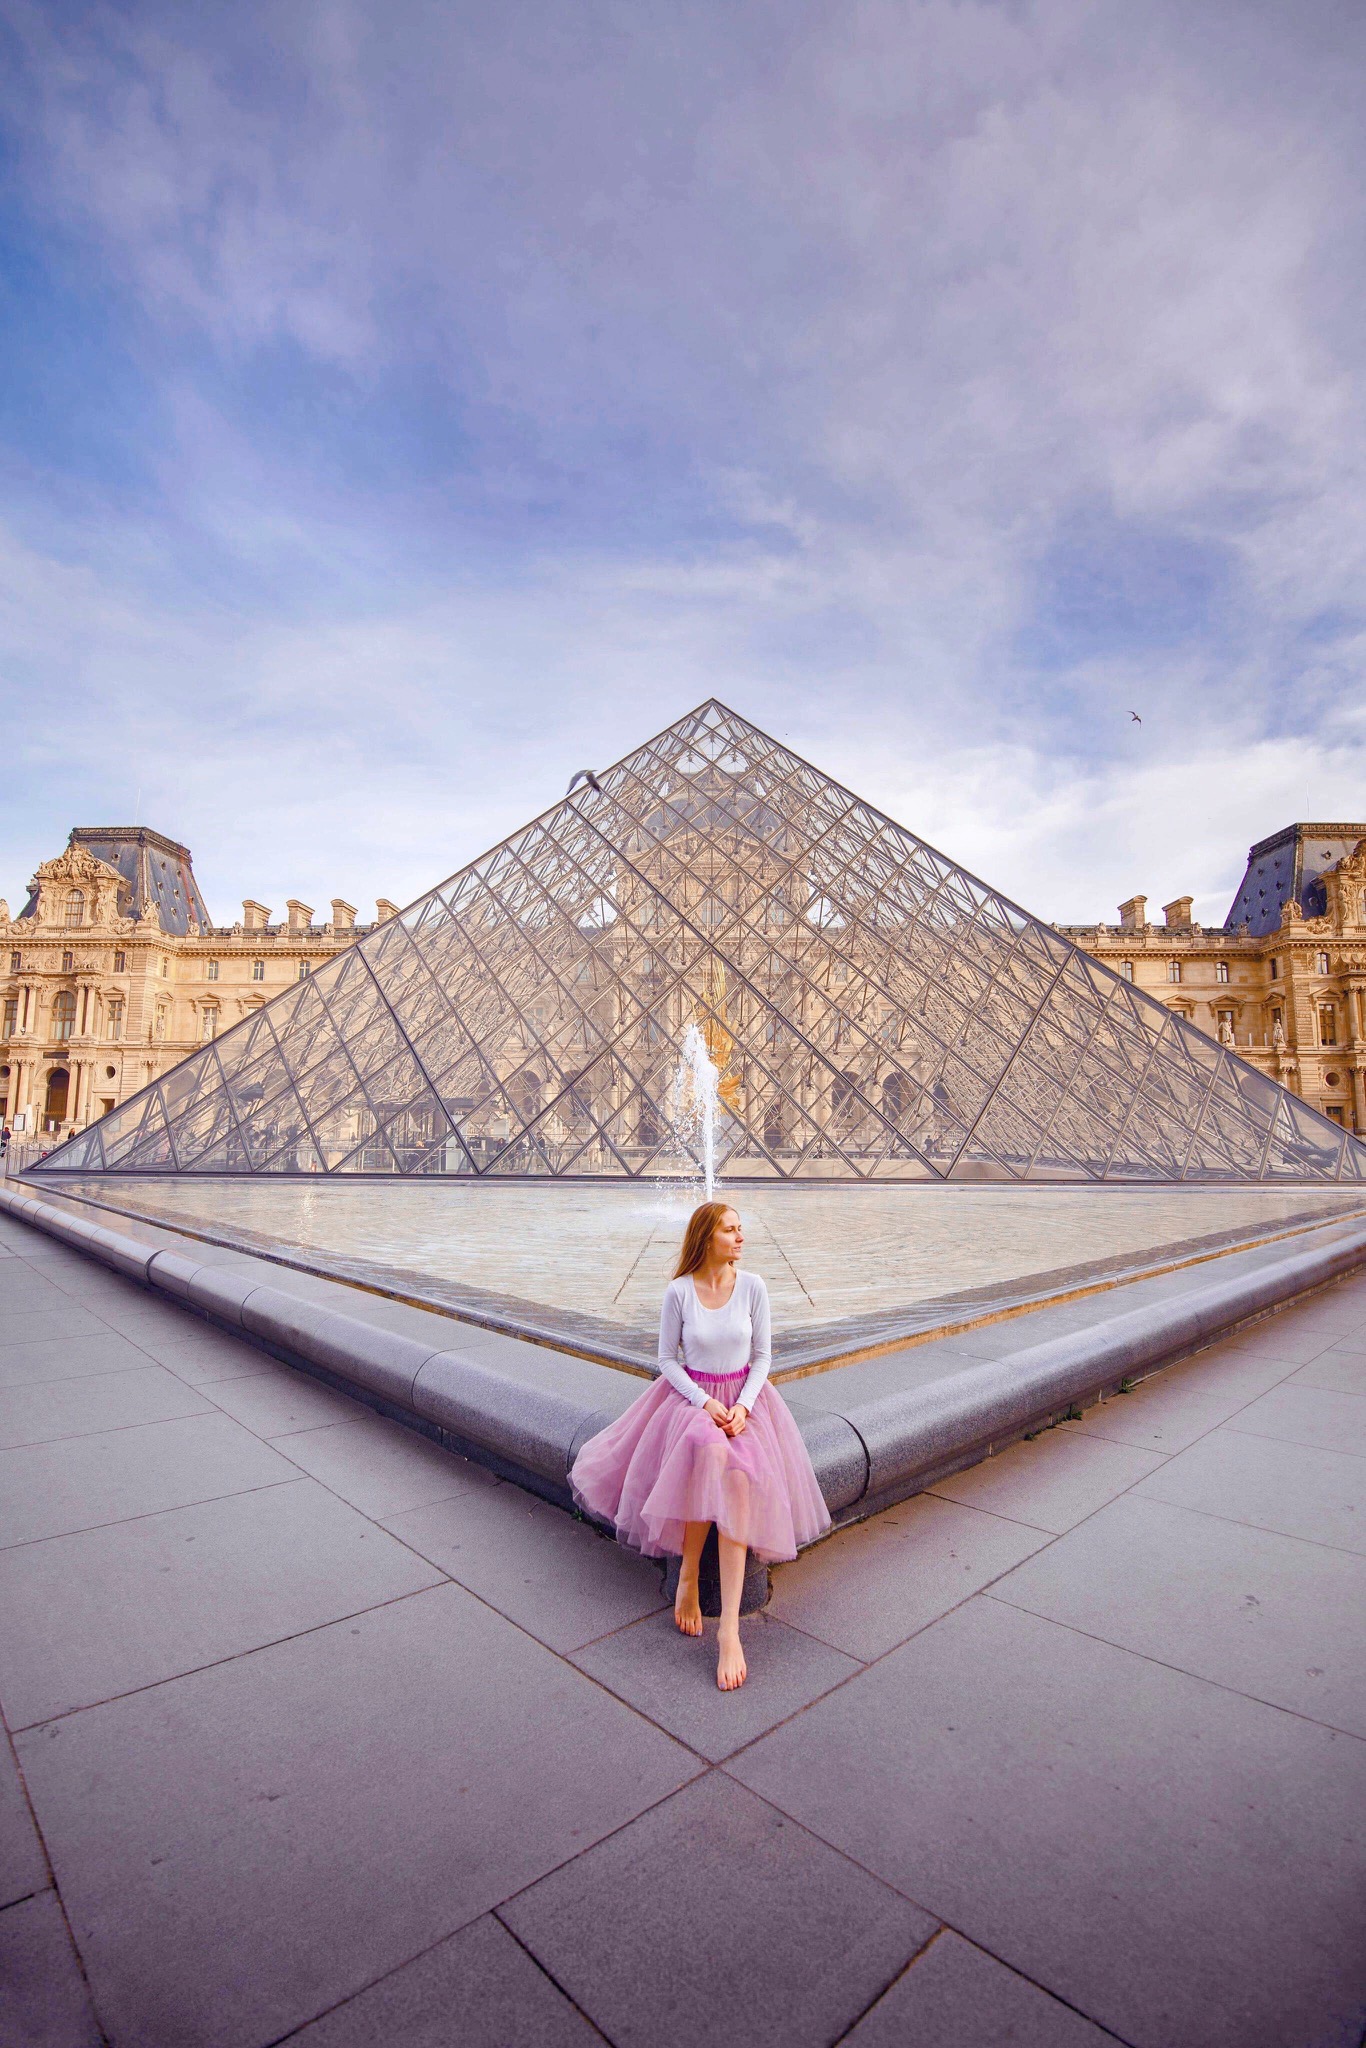 Woman in pink skirt sitting on the edge of the fountain surrounding the iconic glass pyramid at the the Louvre.